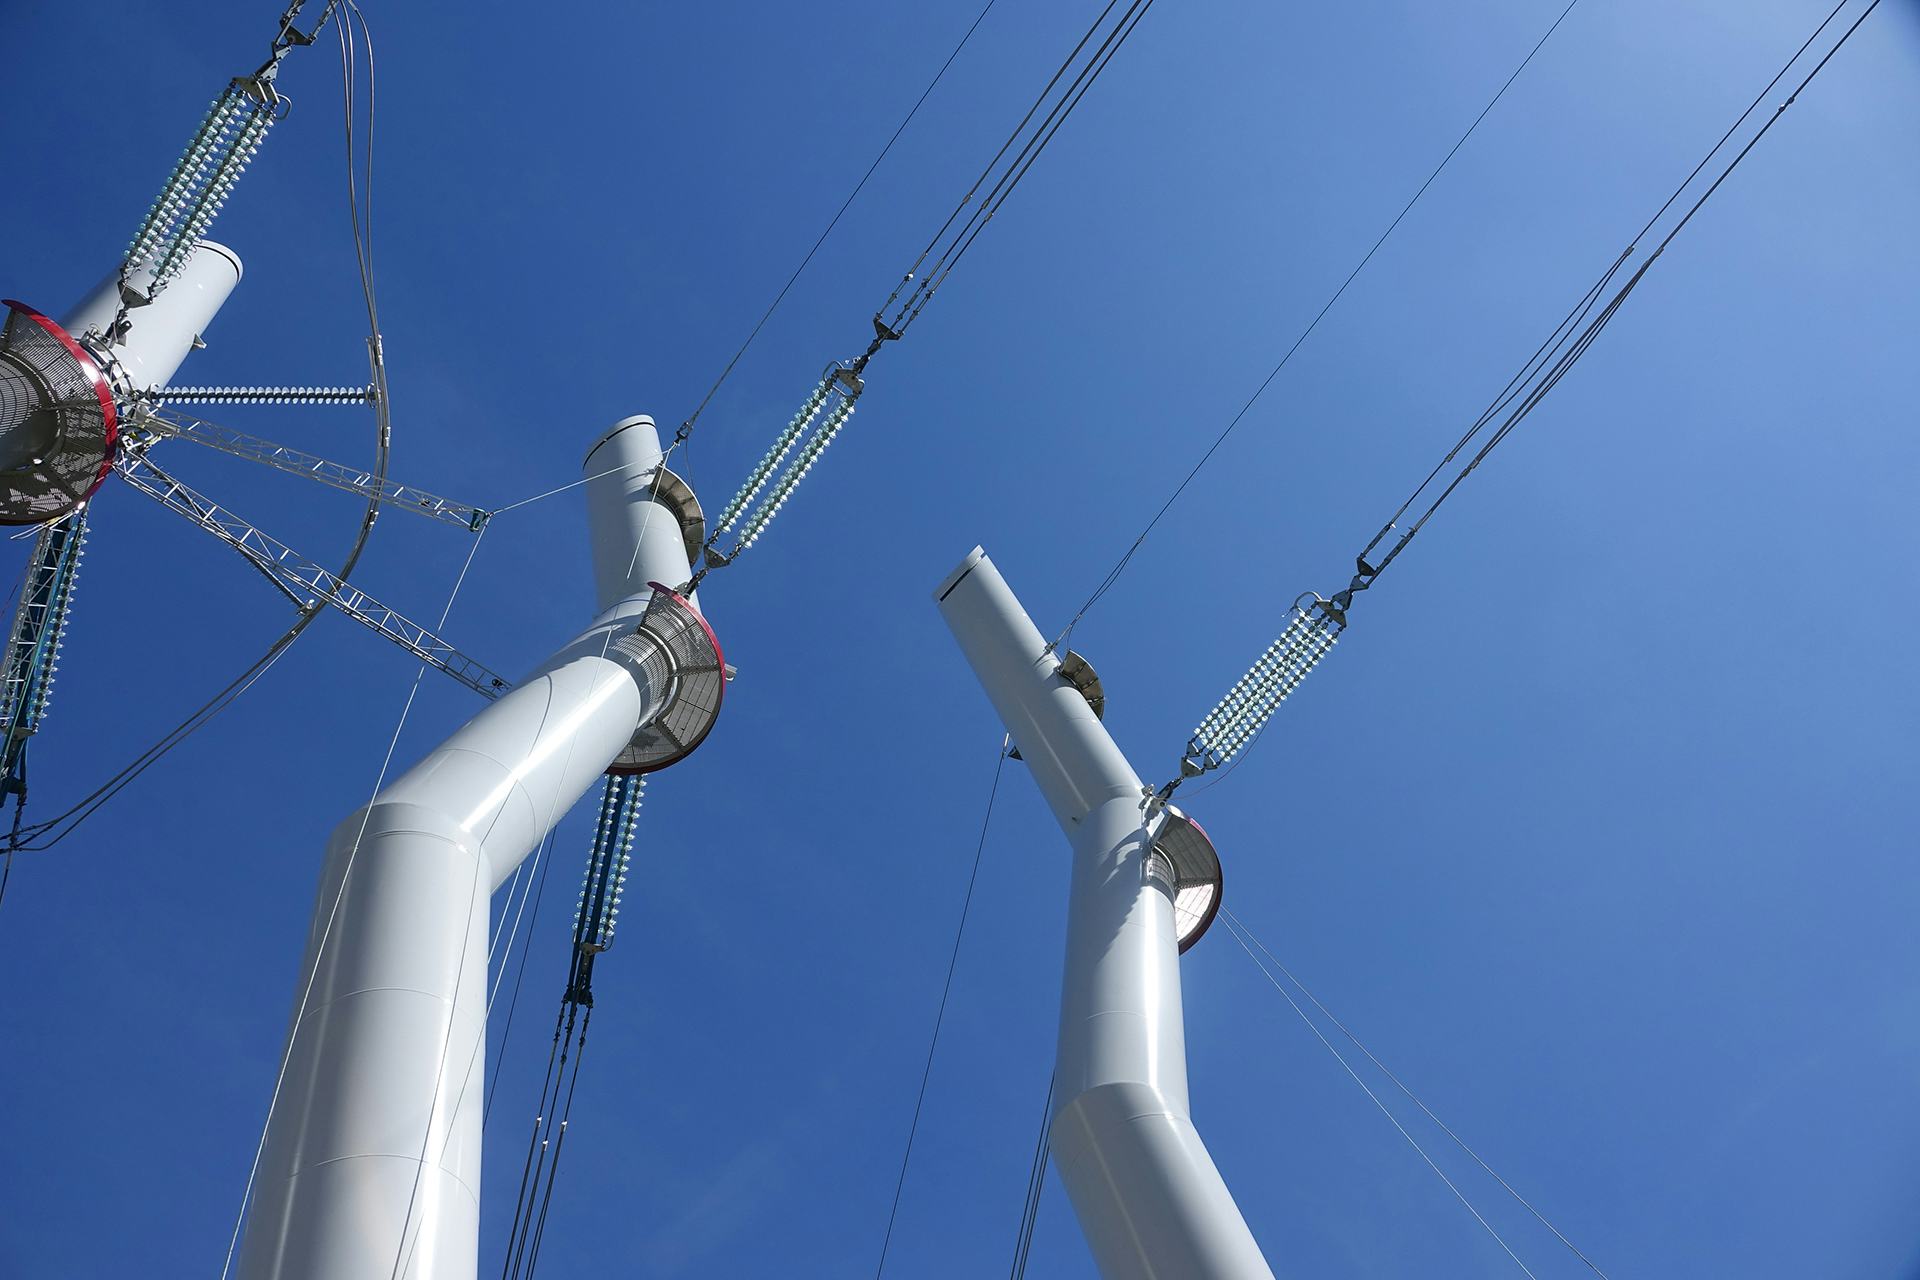 A close up view of three white metal transmission tower's peak